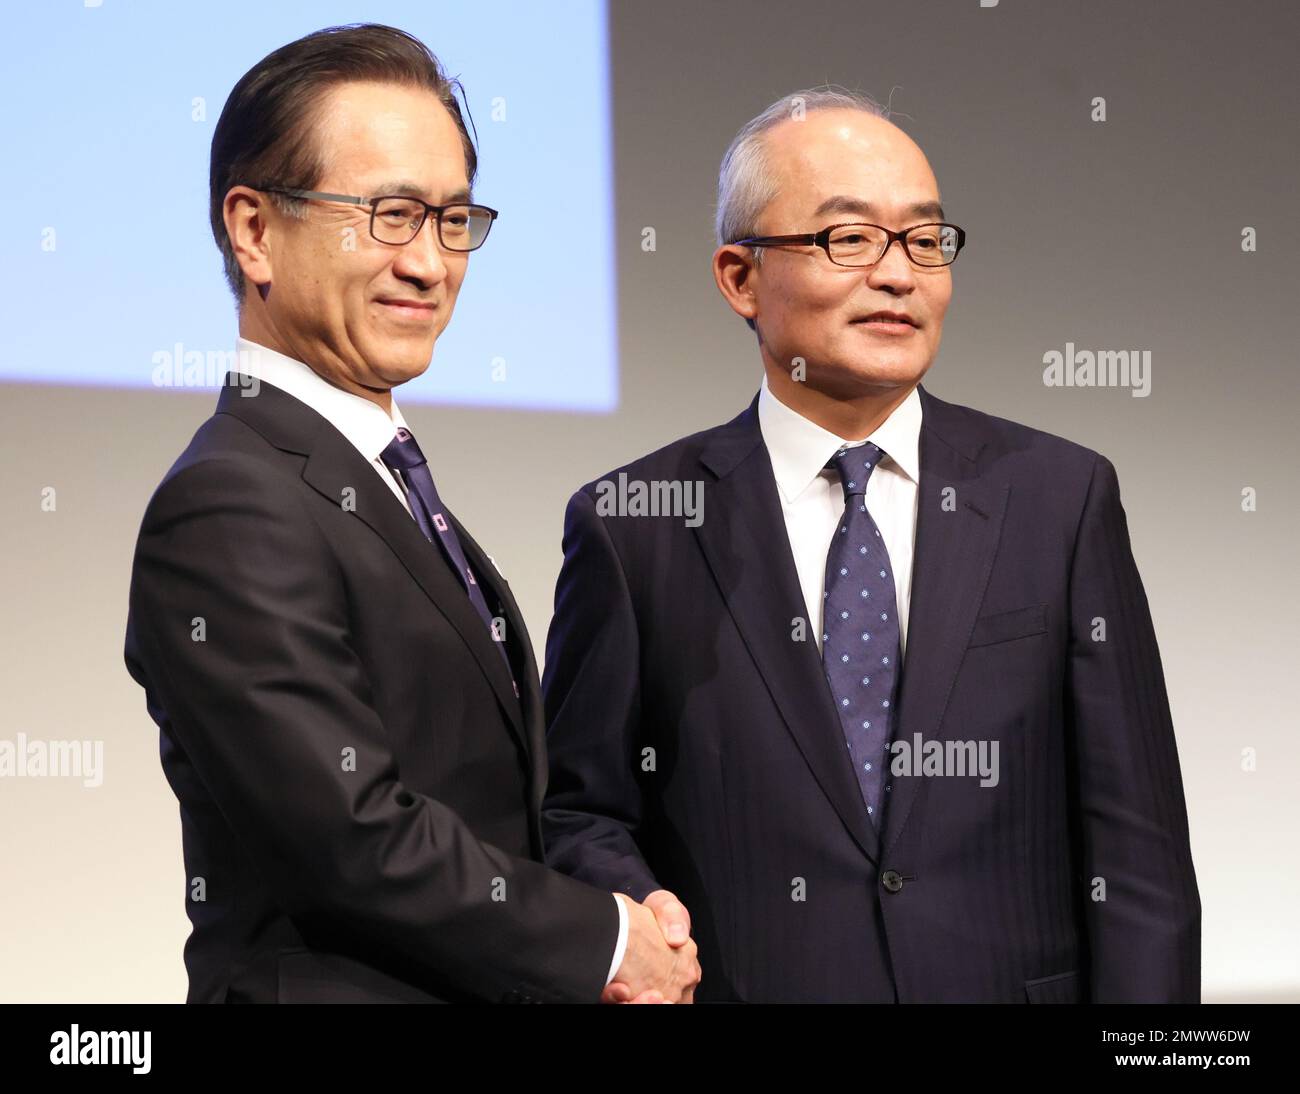 Tokyo, Japan. 2nd Feb, 2023. Japanese electronics giant Sony president and CEO Kenichiro Yoshida (L) smiles with Executive vice president and CFO Hiroki Totoki as Totoki is appointed to the new president and COO, effected from April 1 at the Sony headquarters in Tokyo on Thursday, February 2, 2023. Yoshida will become chairman and CEO of the company. Credit: Yoshio Tsunoda/AFLO/Alamy Live News Stock Photo